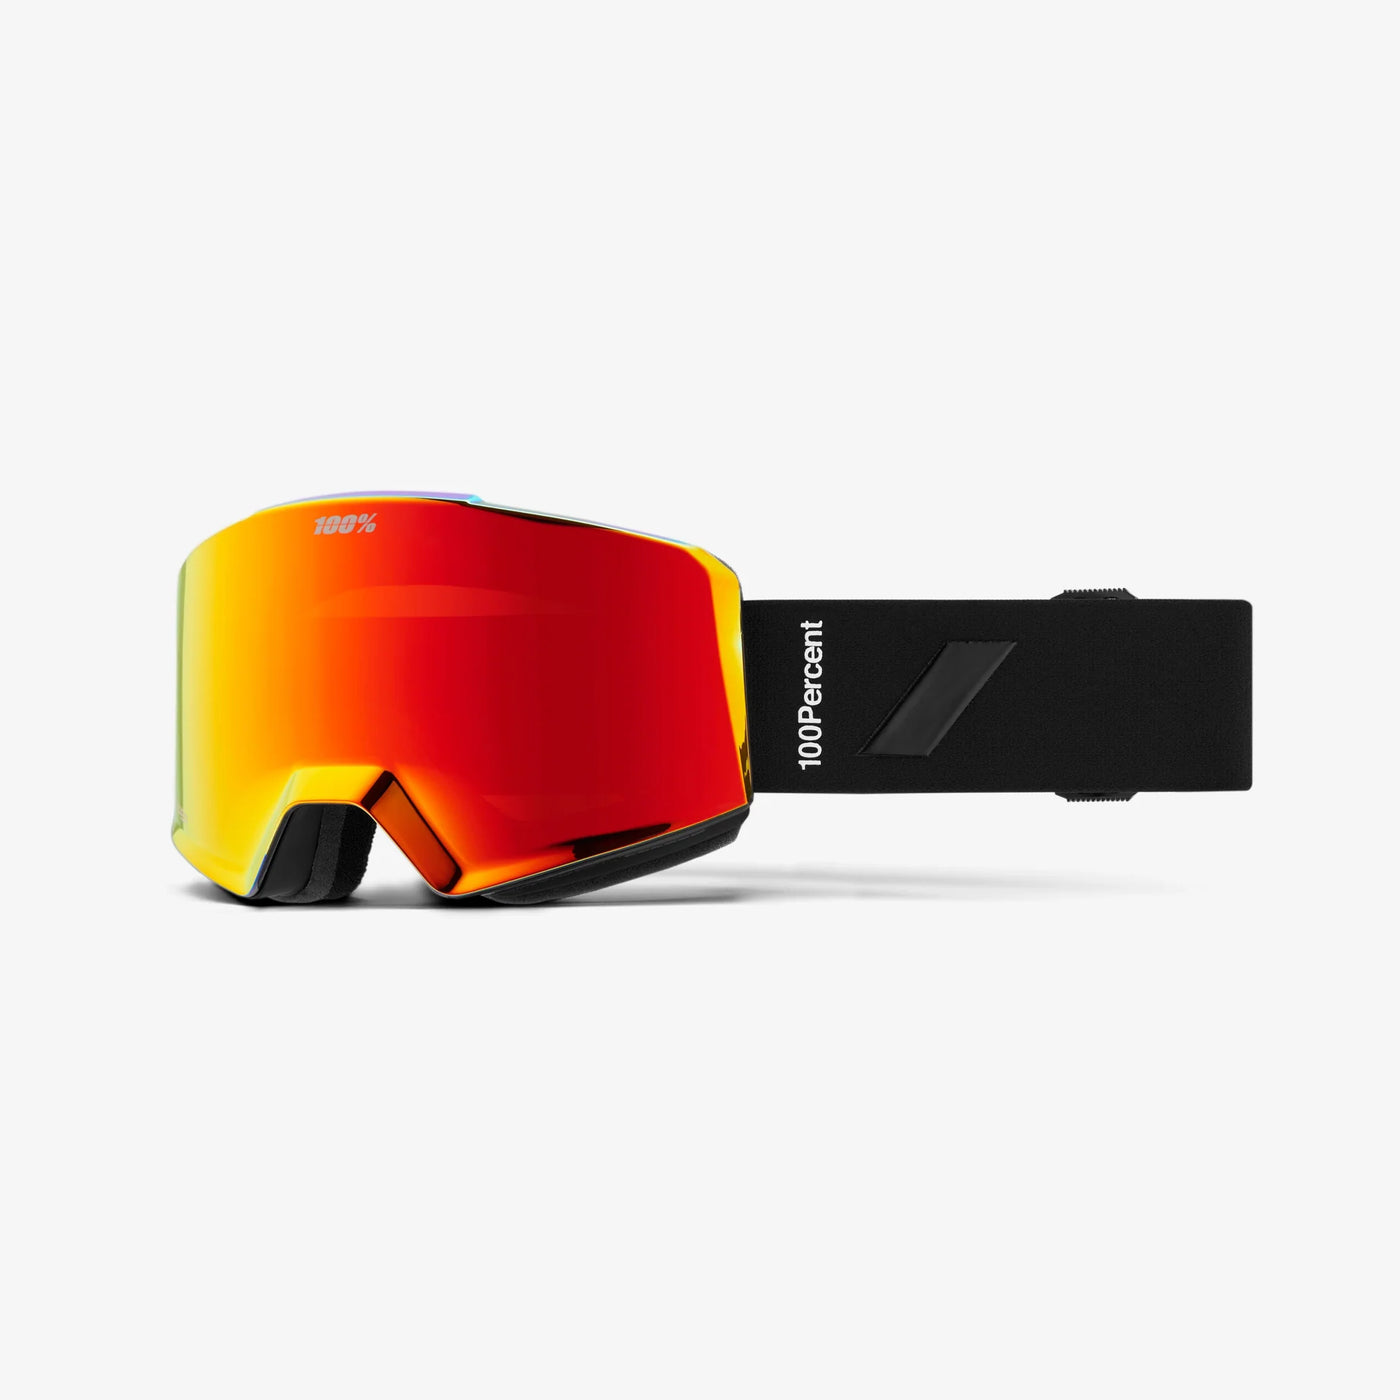 NORG Goggle Snow Black/HiPER® Red Mirror And HiPER® Turquoise Mirror